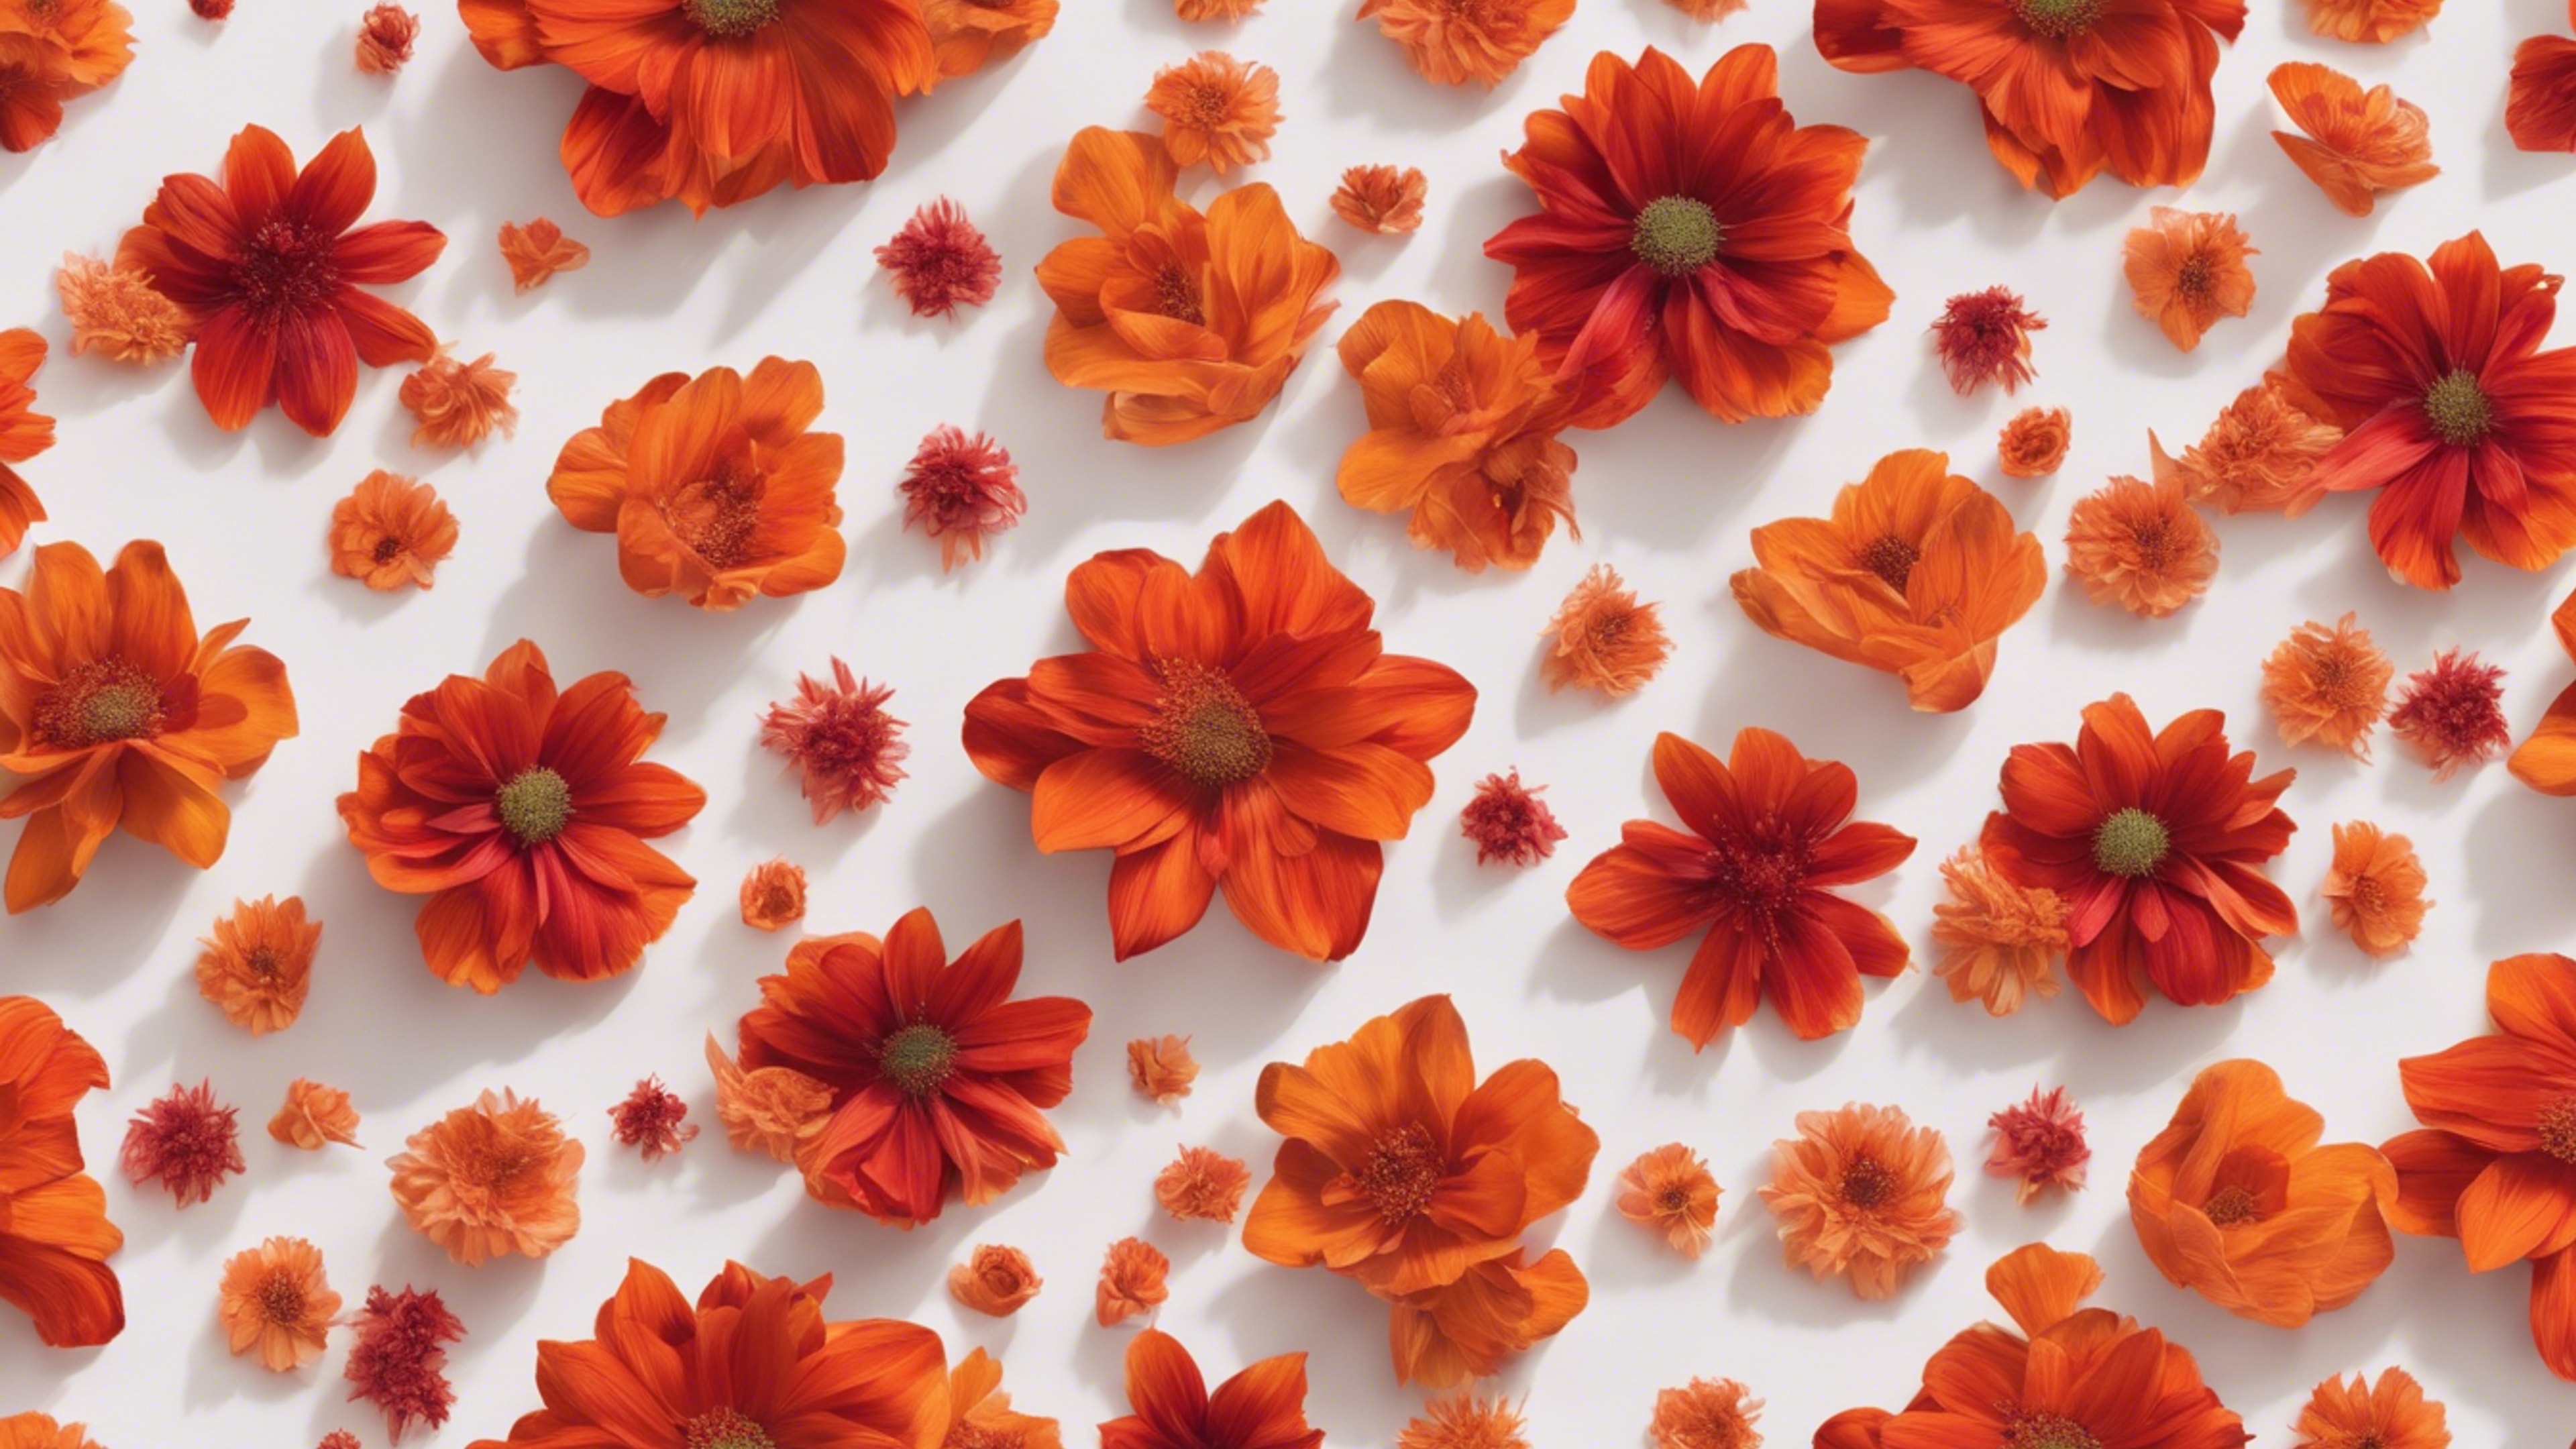 Vibrantly swirling patterns of red and orange flowers that consist of delicate petals and leaves in a seamless layout. Tapeta[1a3317c1e5234fee8b43]